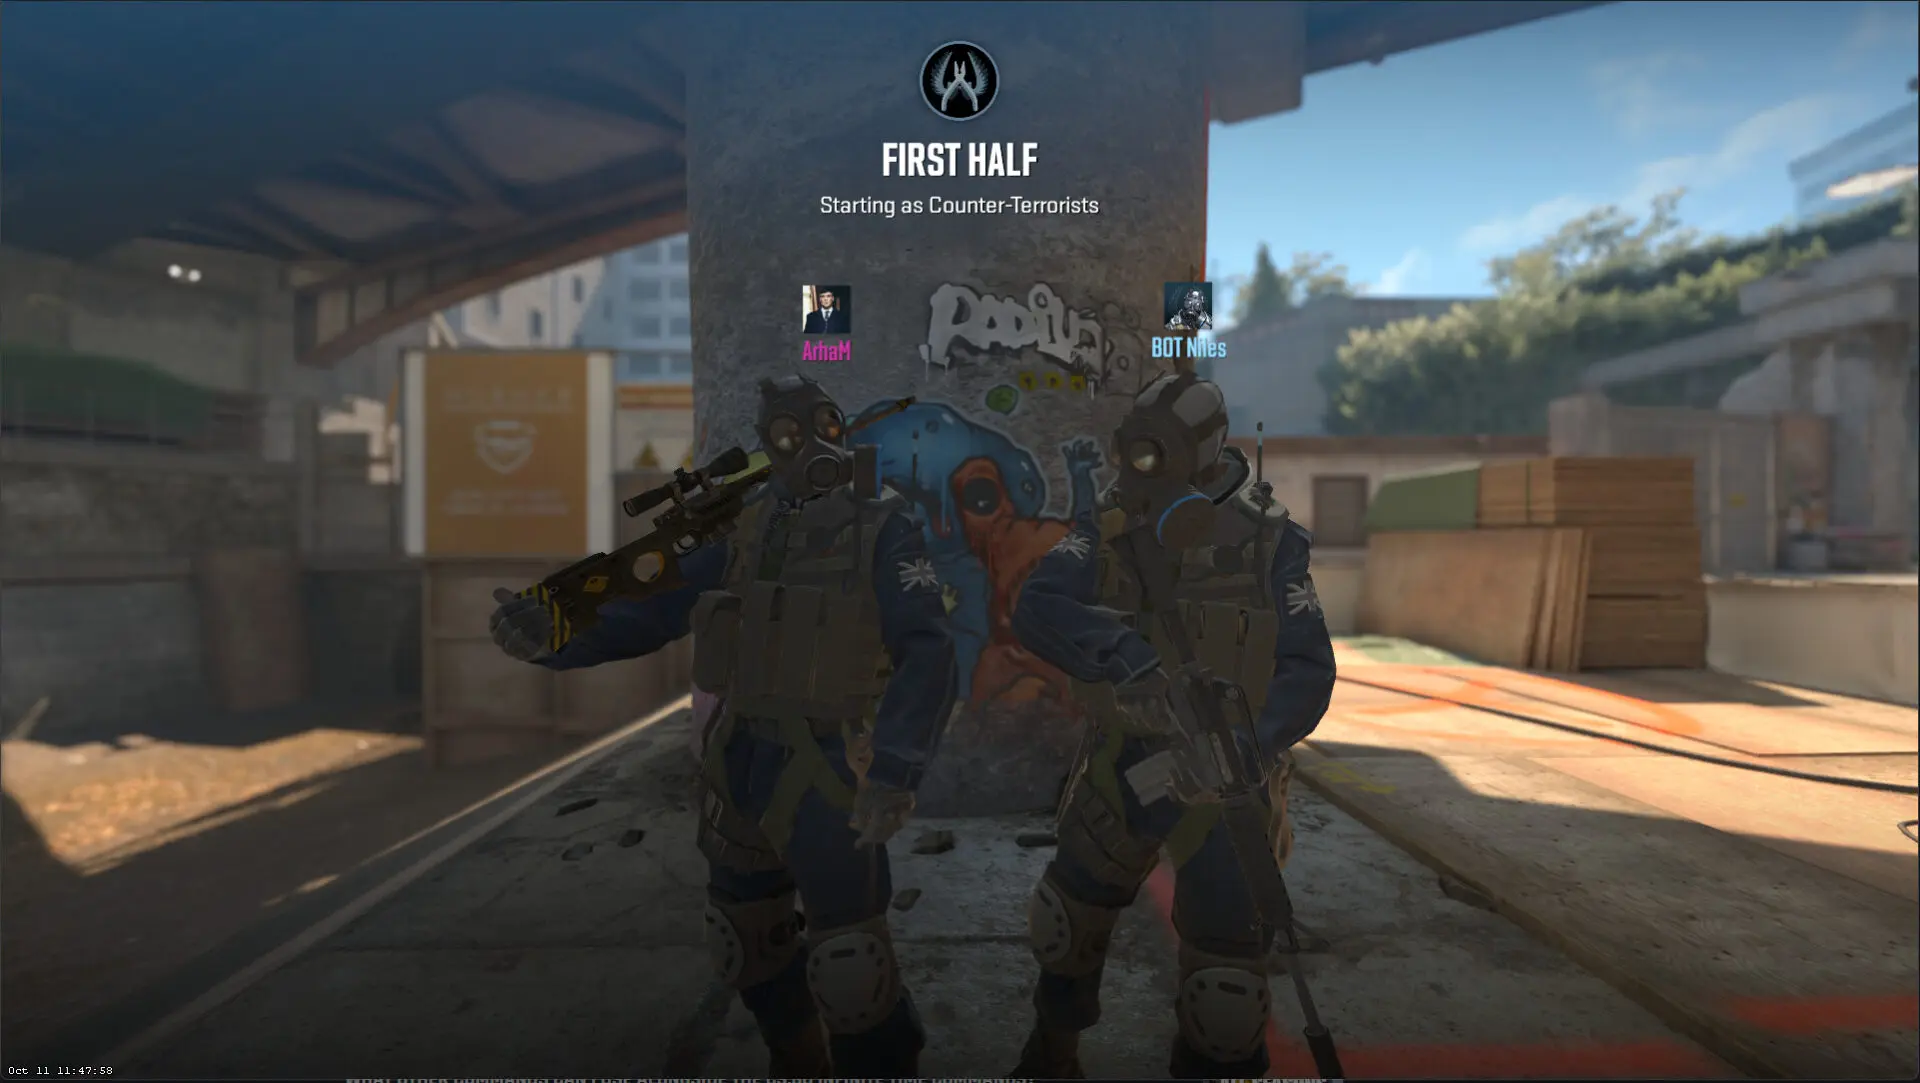 Teams consist of only 2 players in Wingman mode.